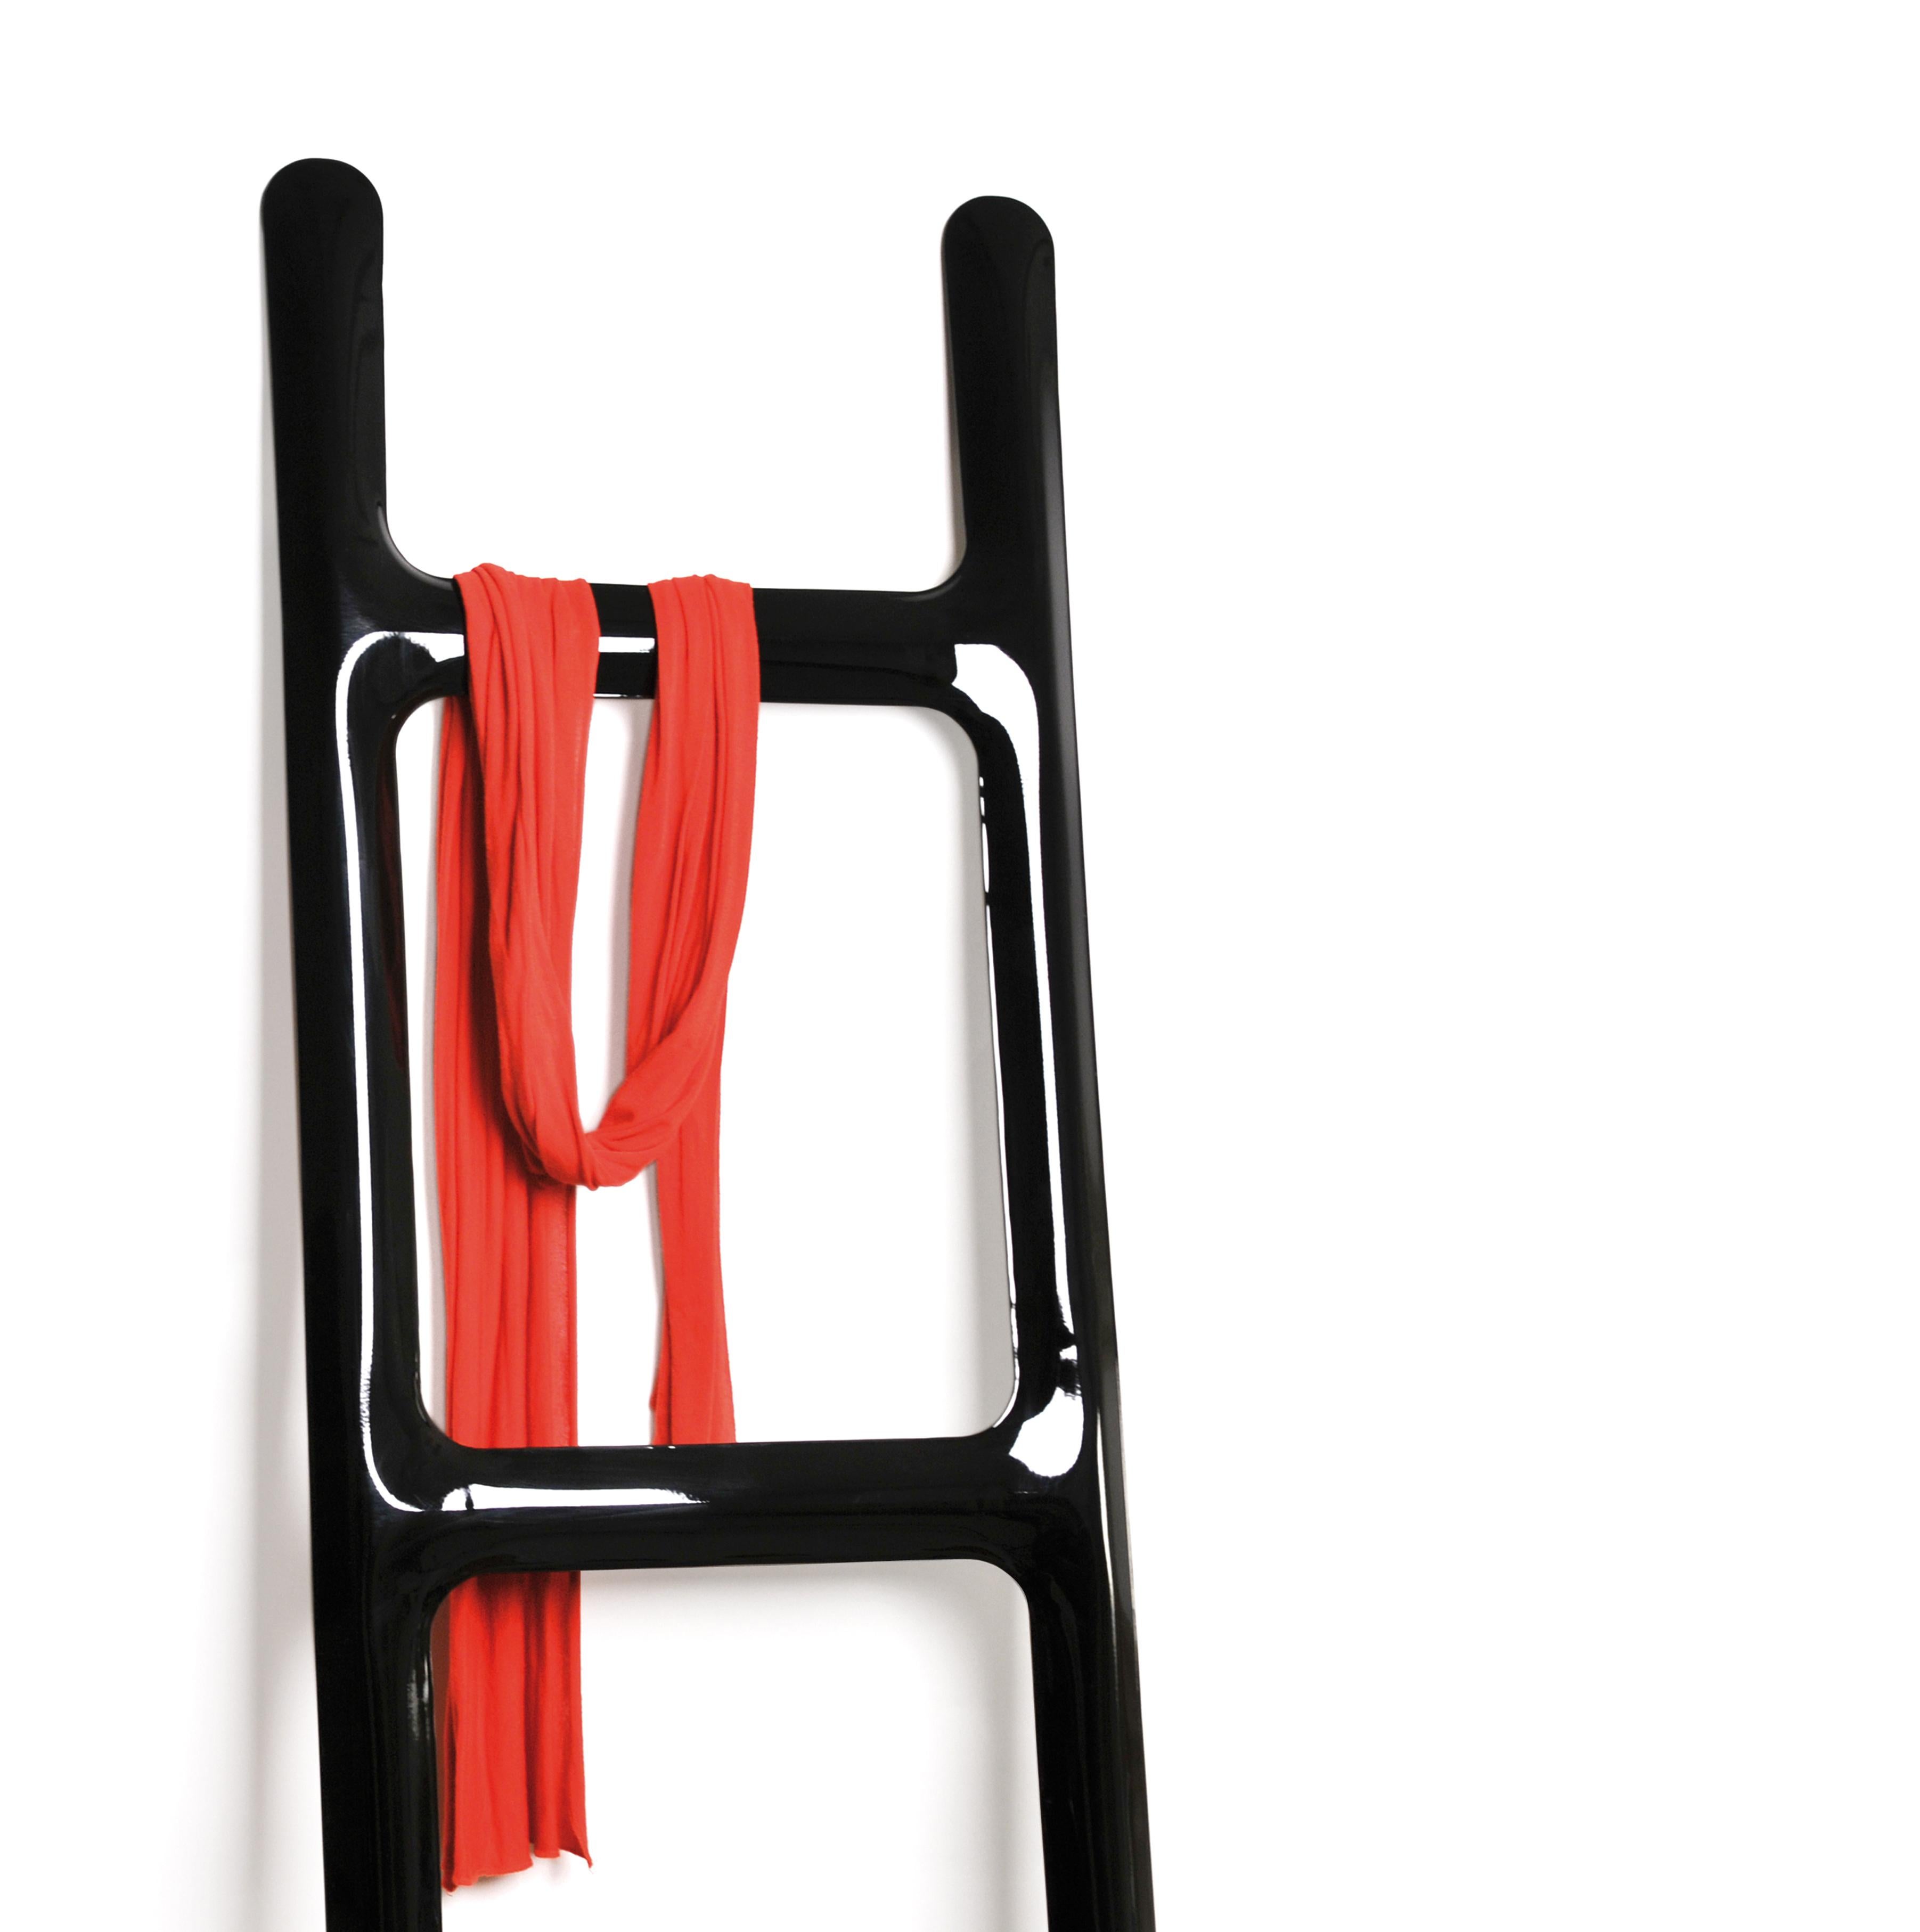 Multiplication of a simple 90 degree shaped ‘H’ letter inflated in FiDU – designed as a bedroom hanger for dressing-gowns and towels.

Darb Hanger is available in carbon steel and stainless steel with the following finish options;

Carbon